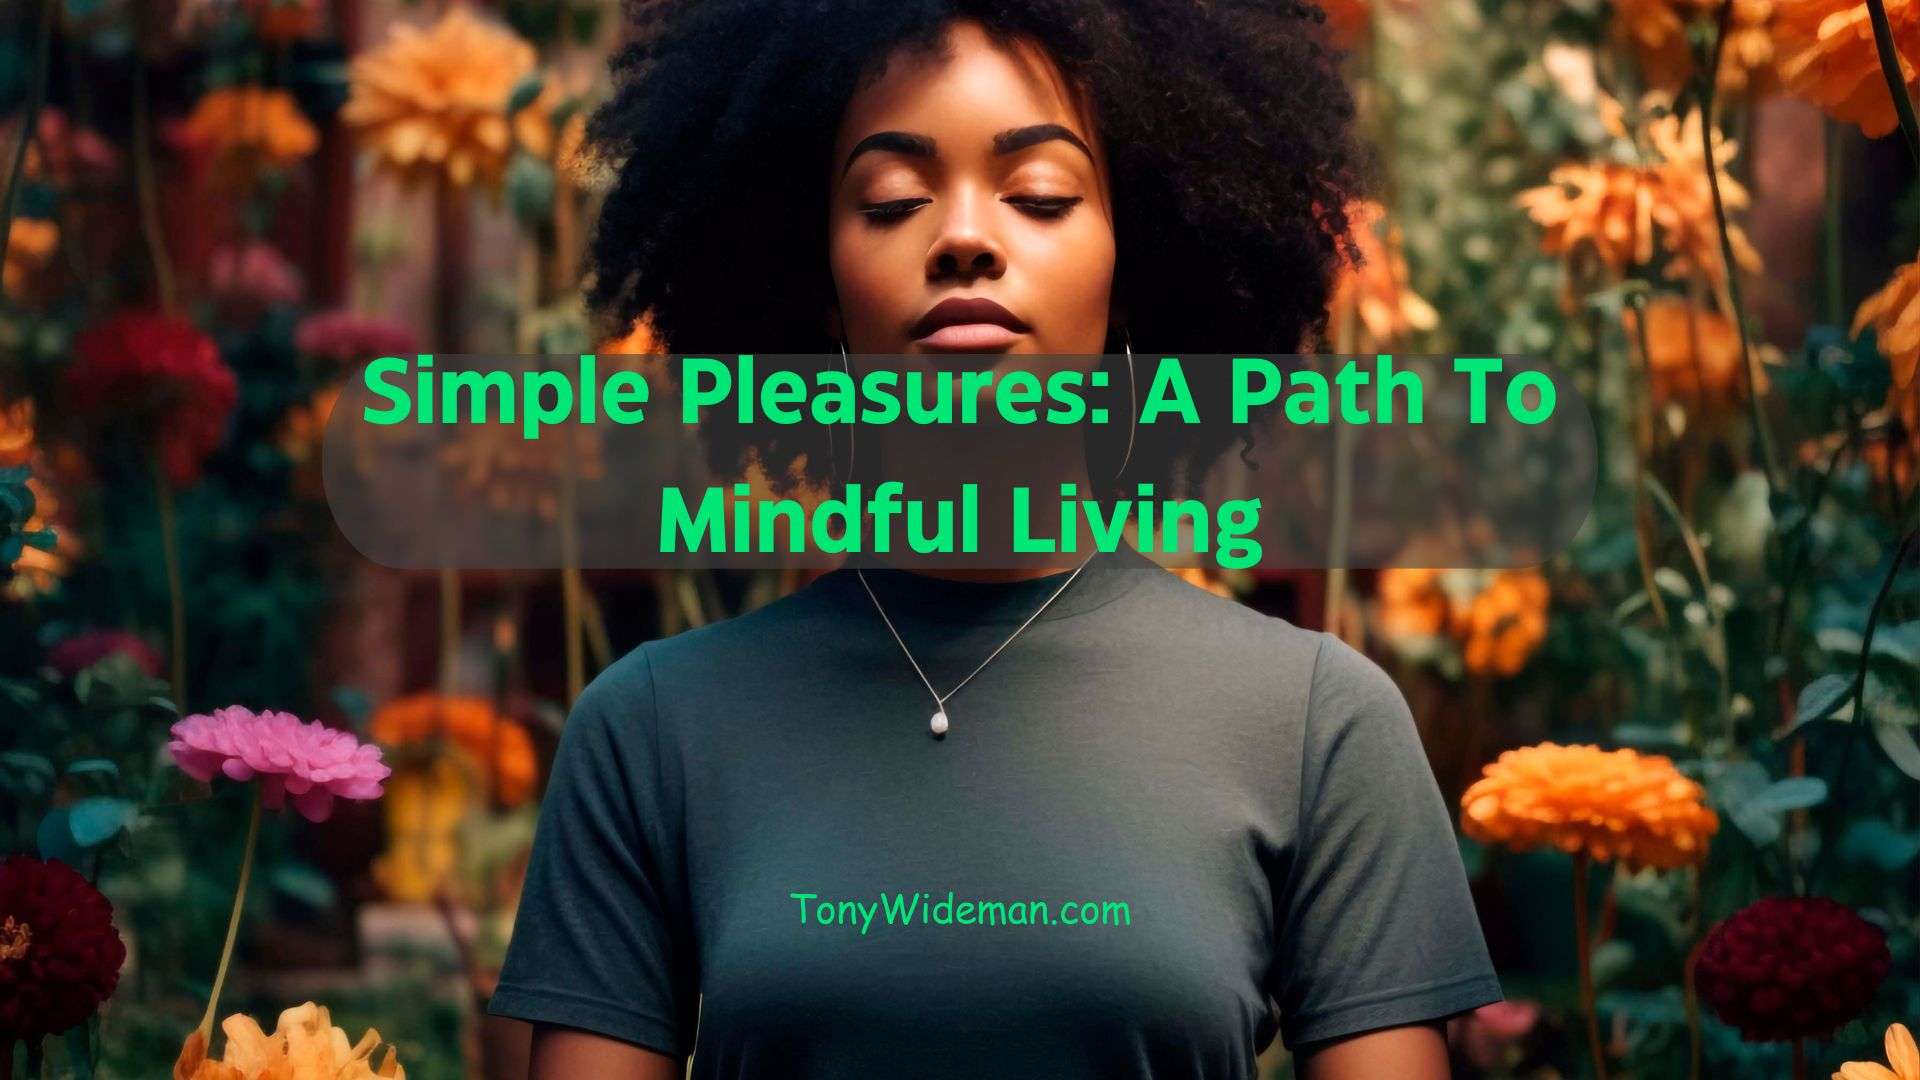 A Path To Mindful Living